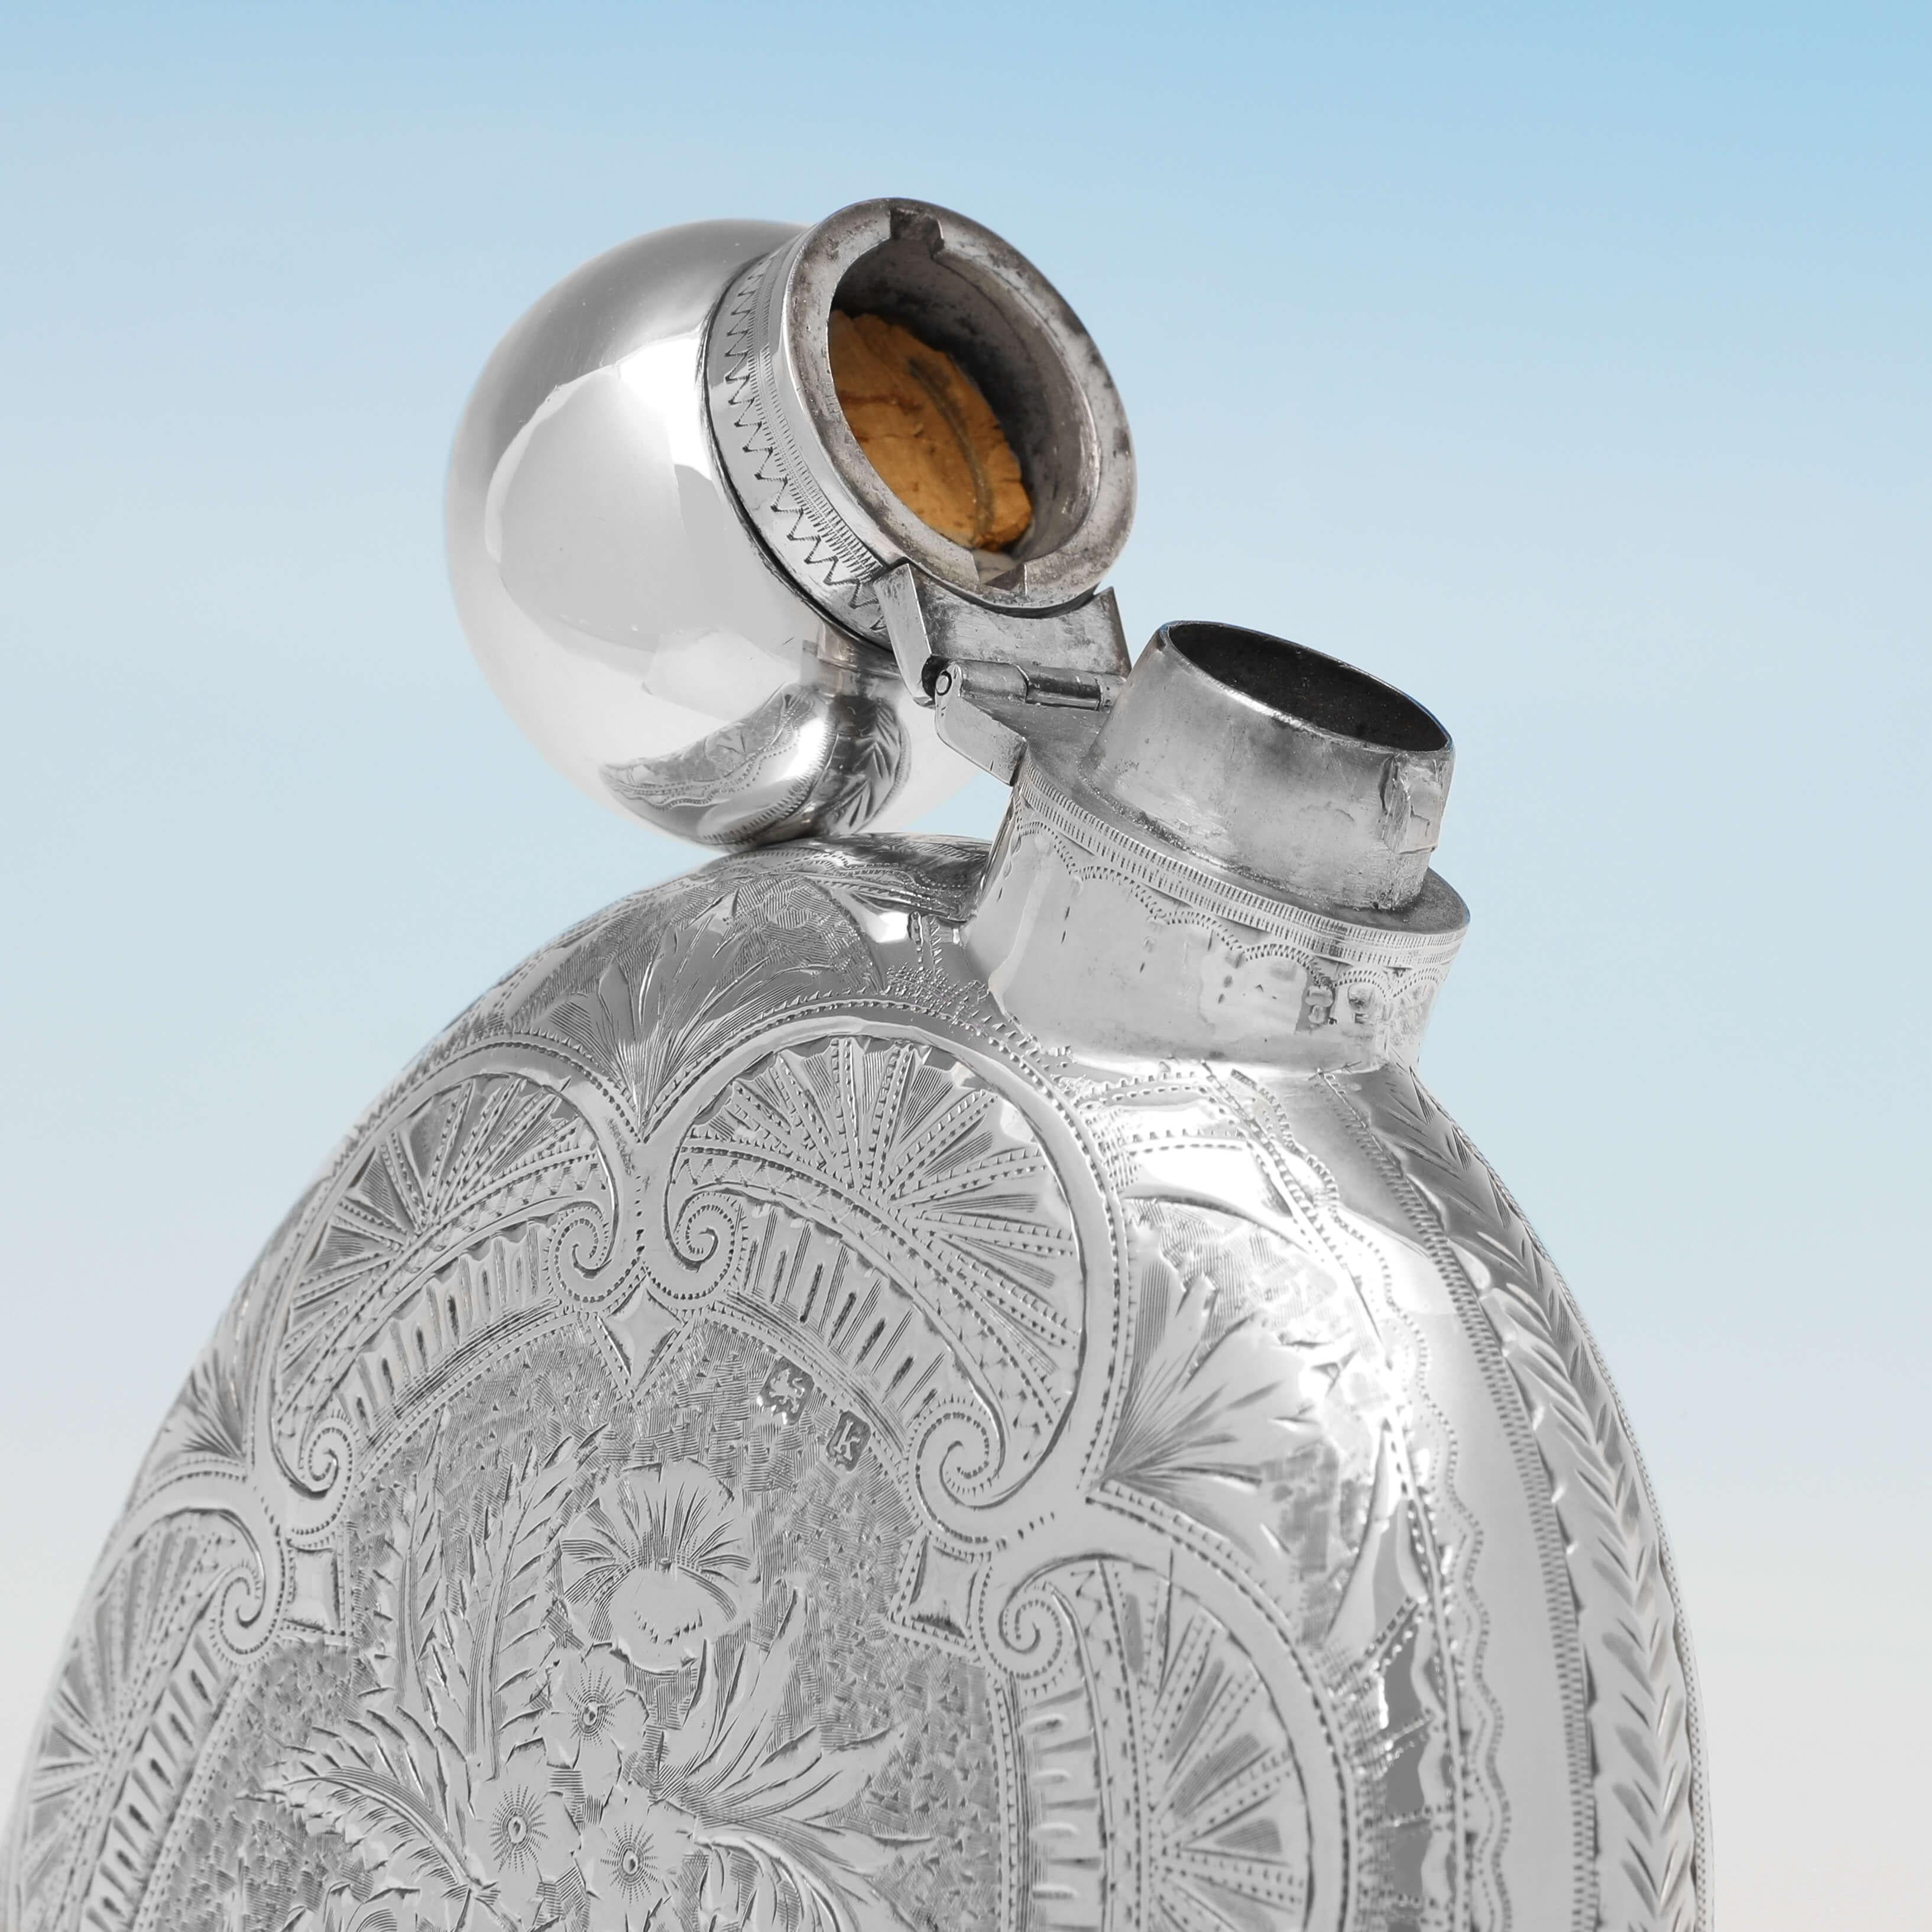 English Stunning Engraved Antique Sterling Silver Hip Flask, Joseph Gloster, 1909